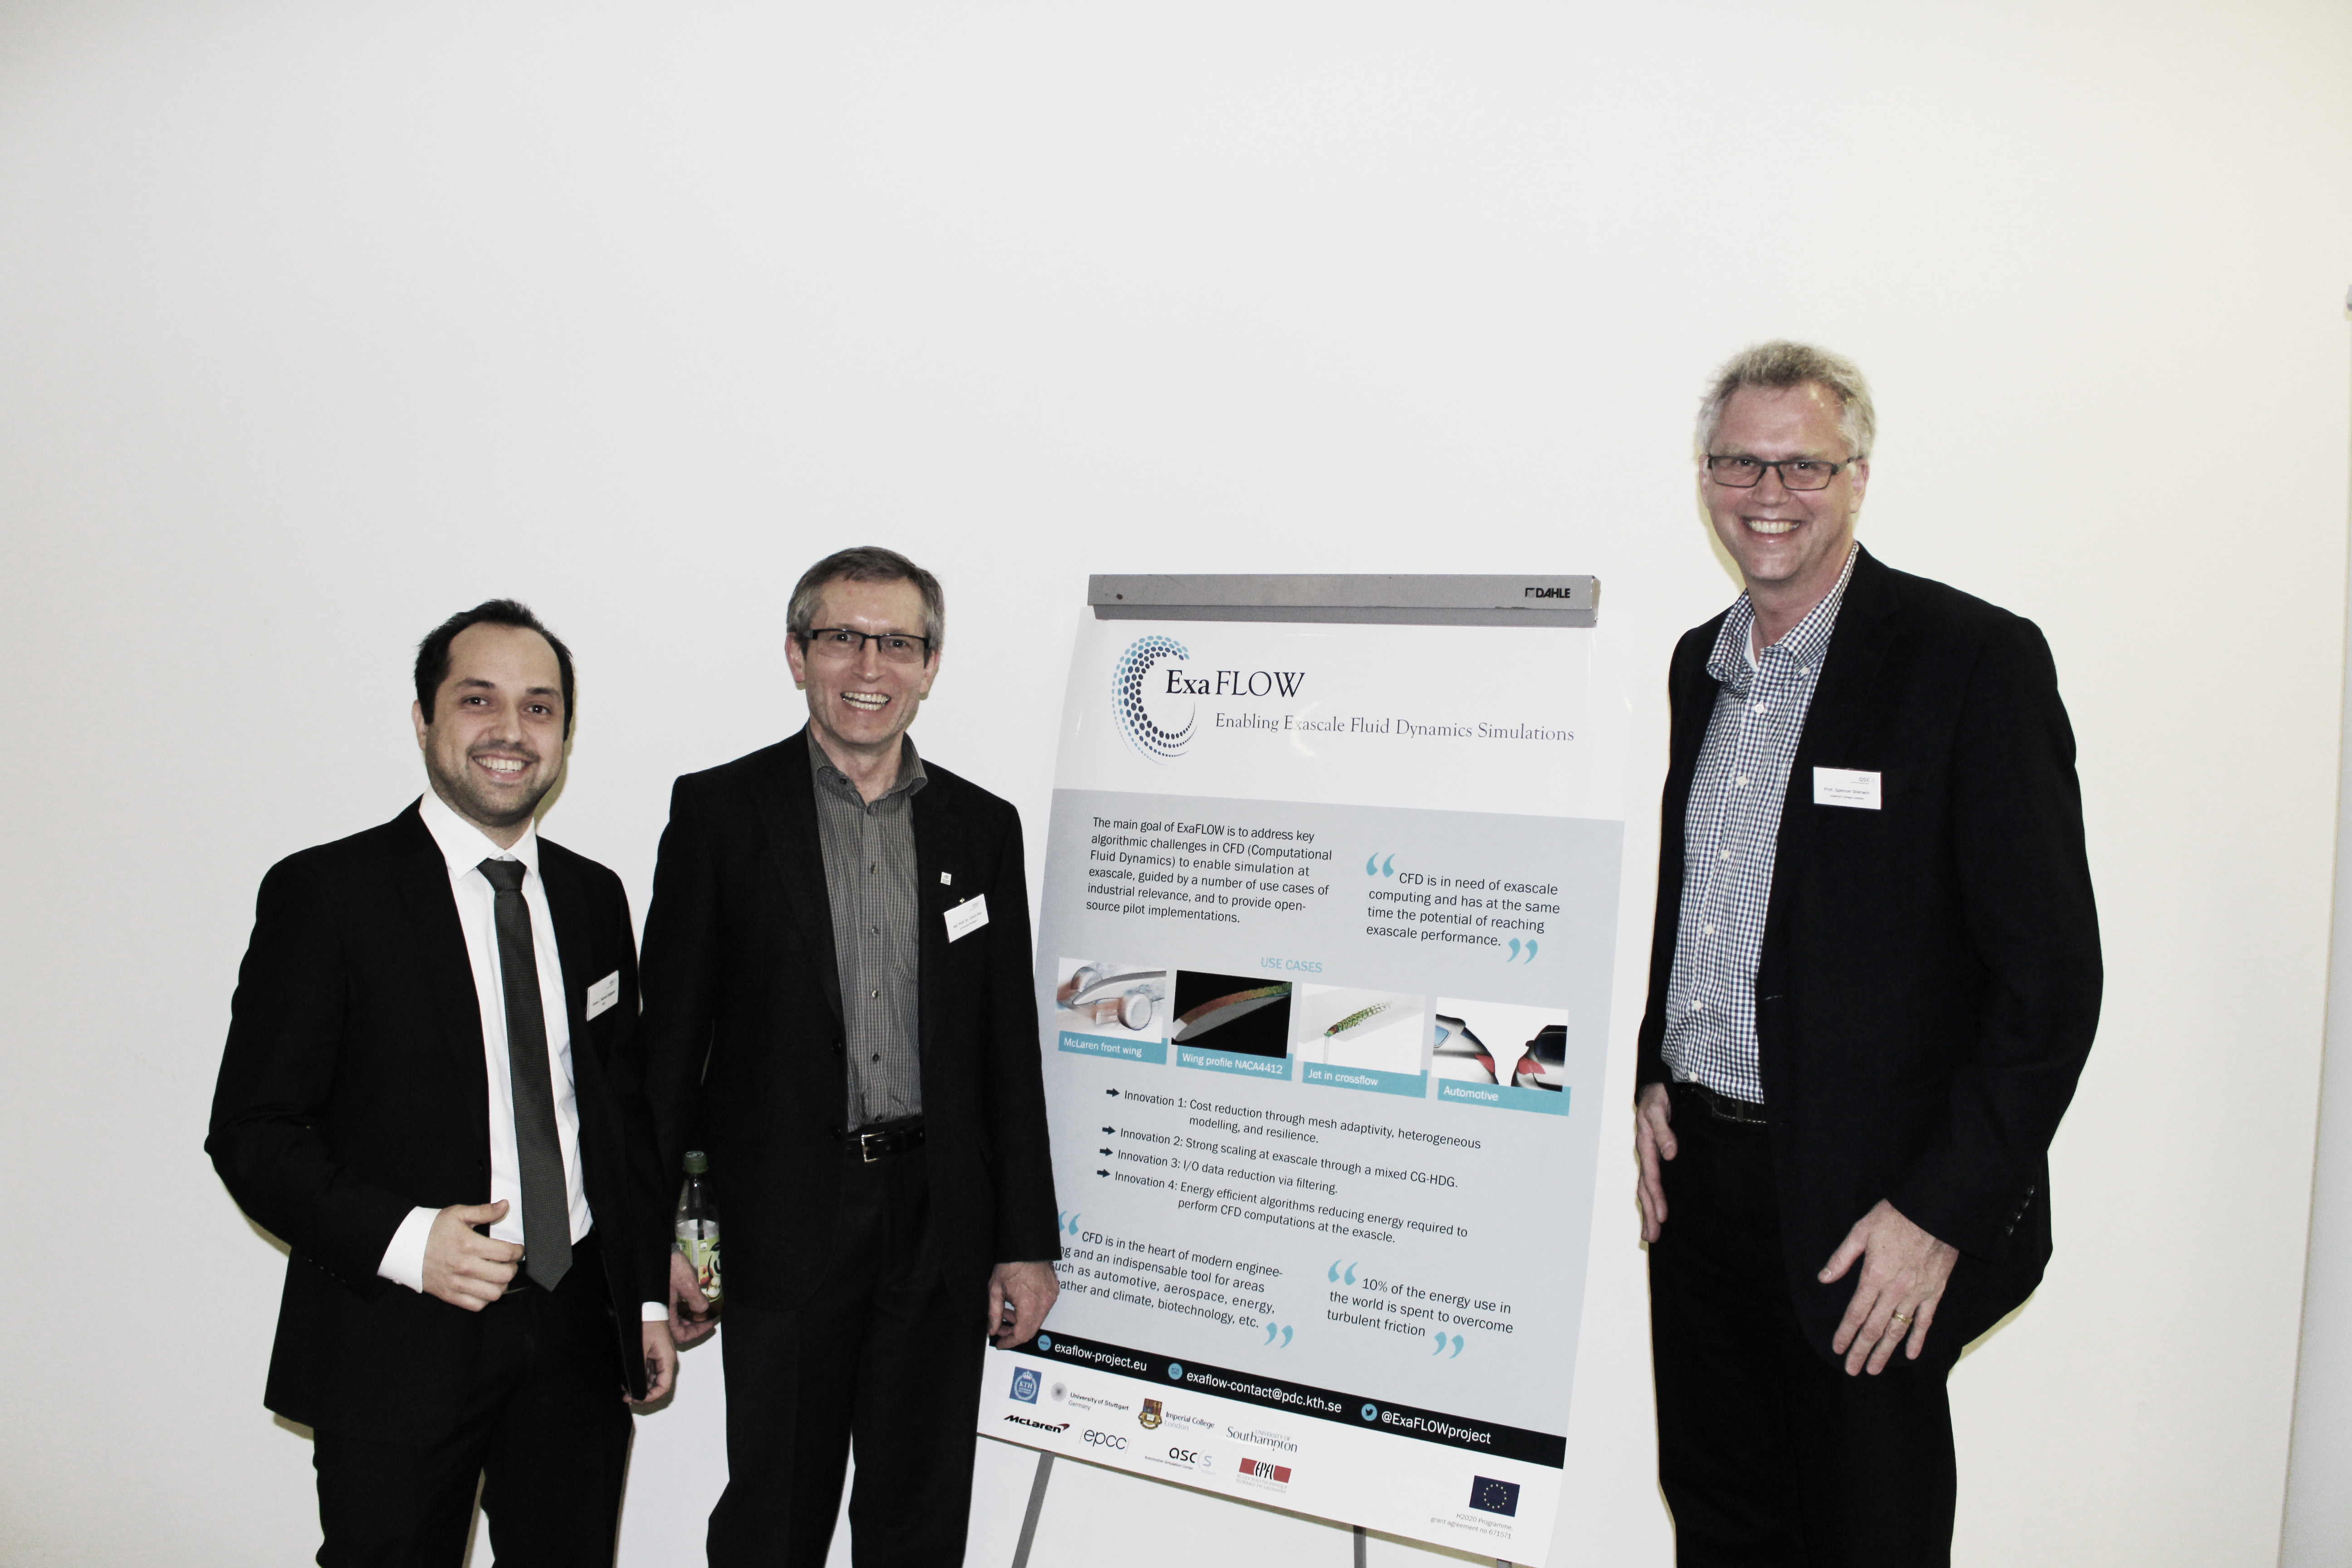 Spencer Sherwin, Carlos Falconi, Ulrich Rist presenting ExaFLOW at a Workshop of ASCS in Stuttgat